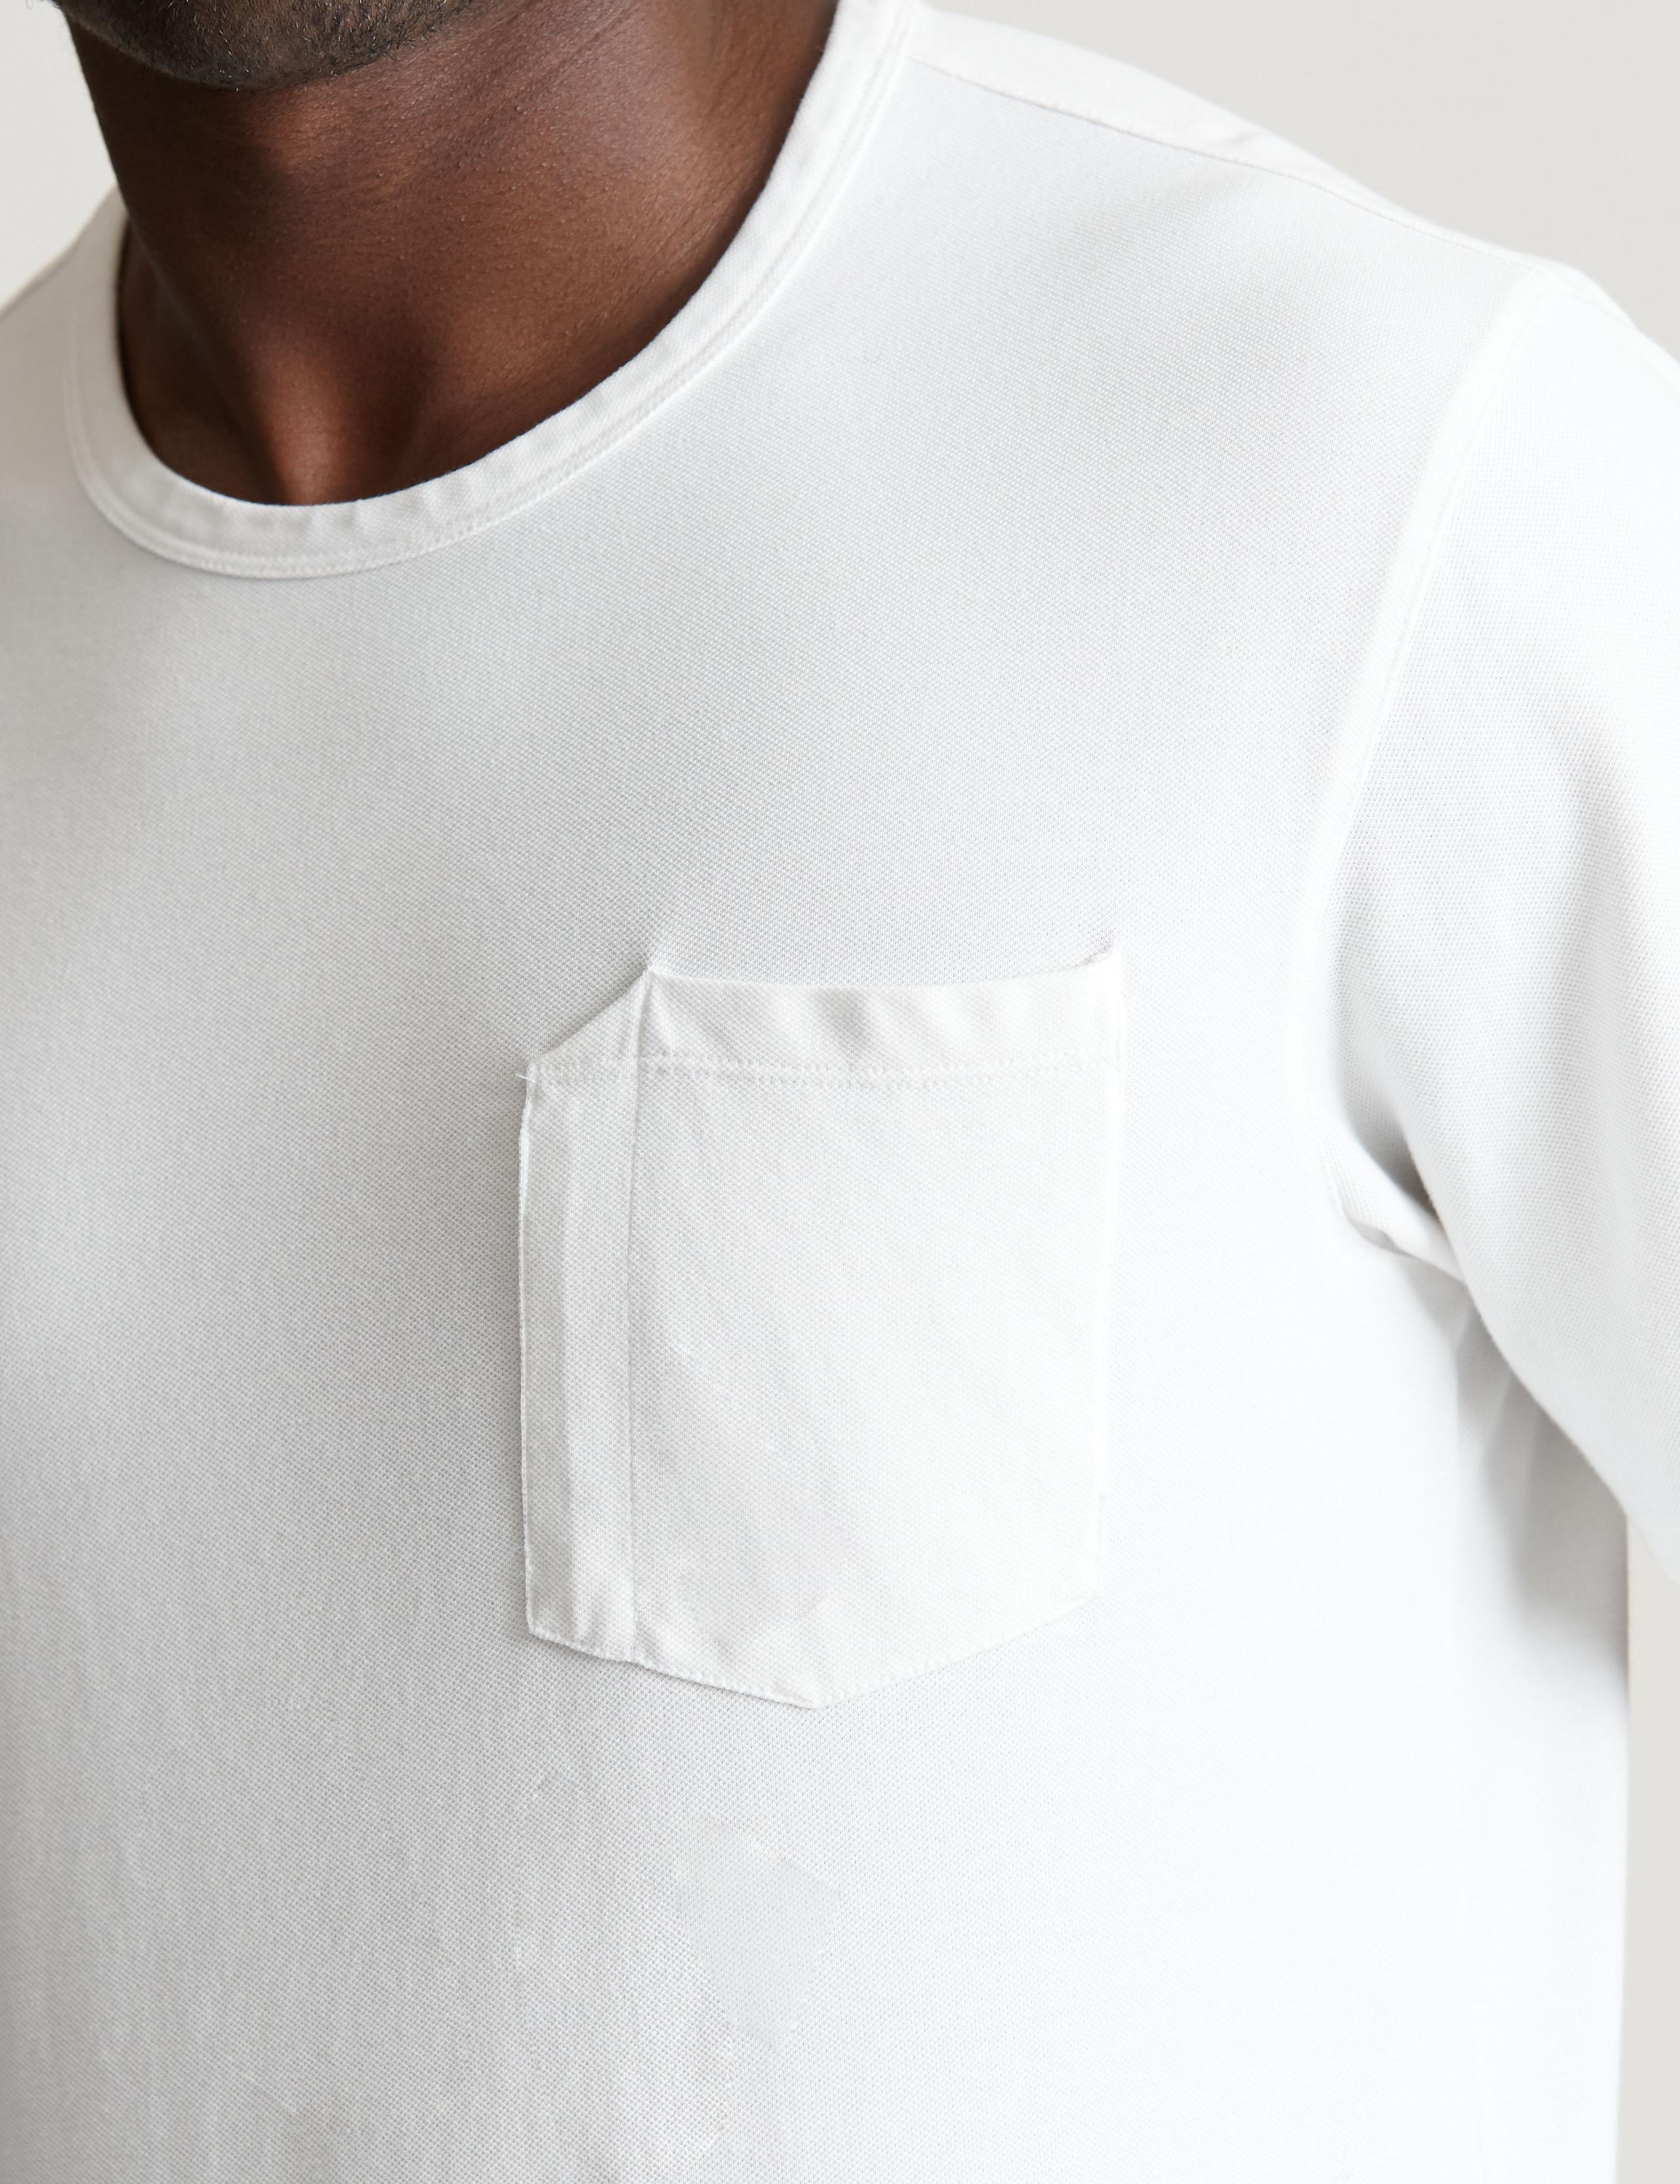 Closeup view of chest pocket of Pique Pocket Tee